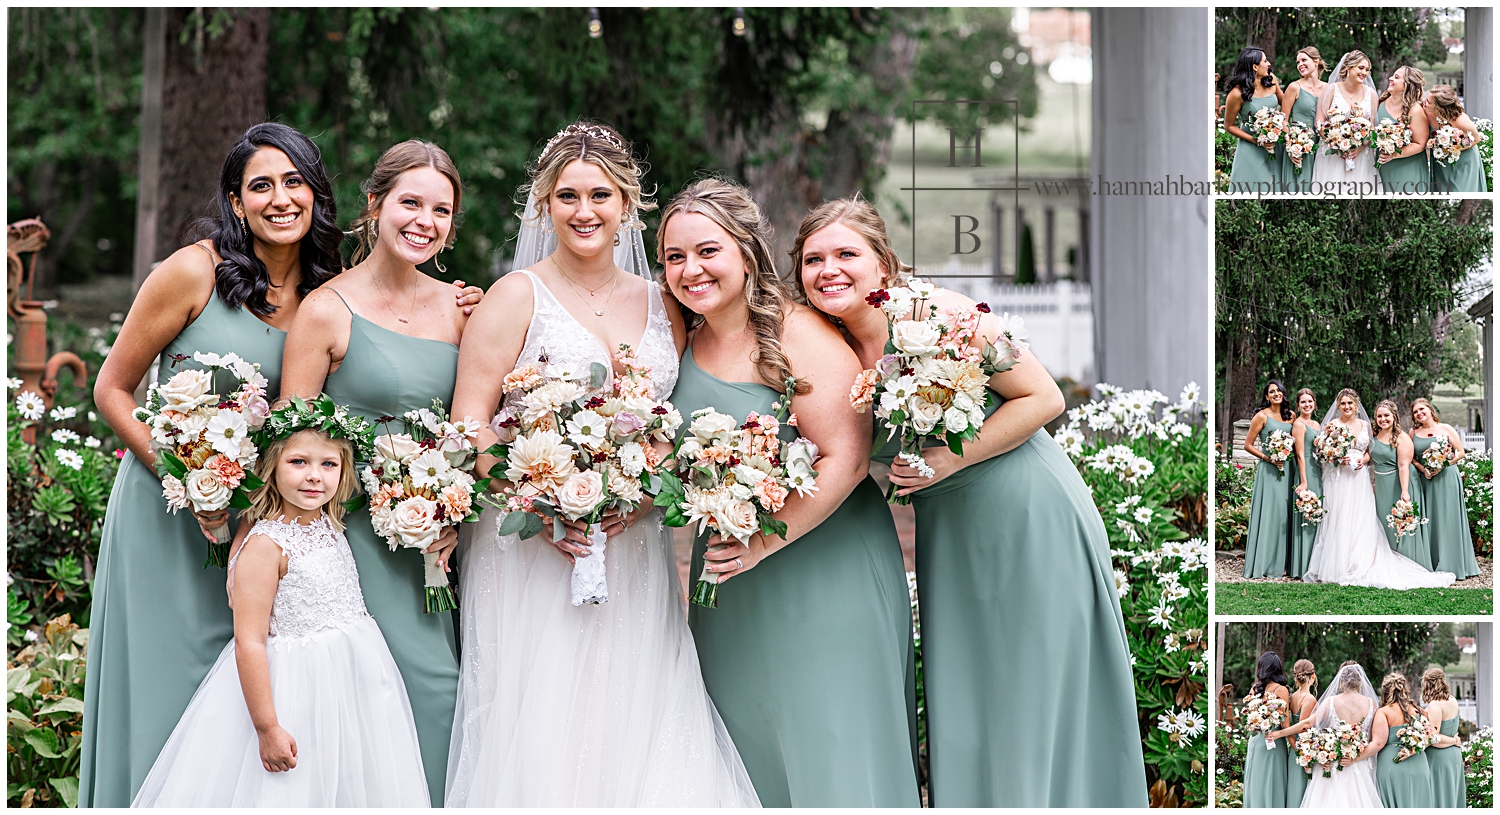 Bridesmaids in sage green dresses pose with bride.